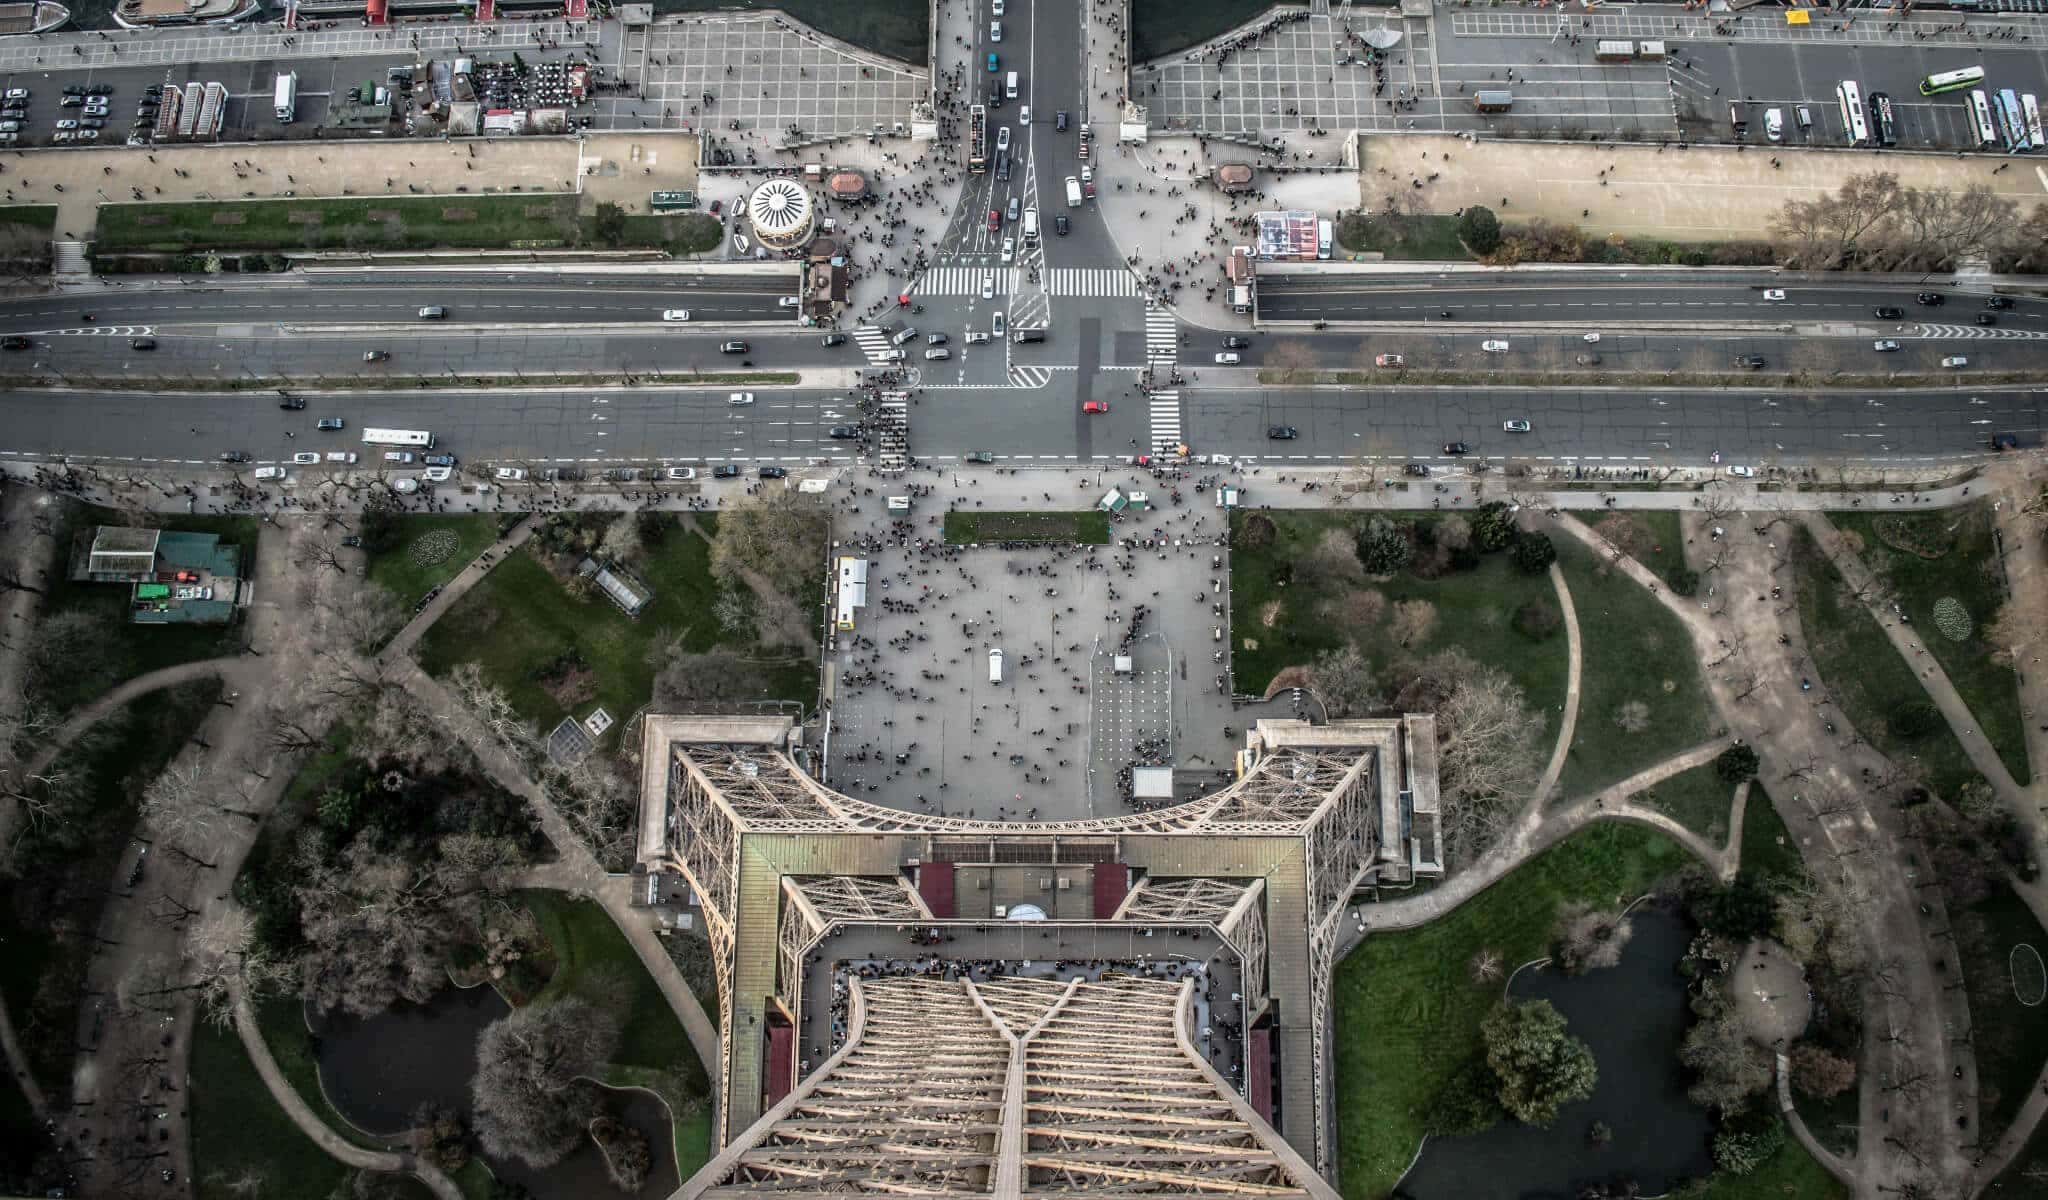 A view of Paris streets from the top of Eiffel Tower